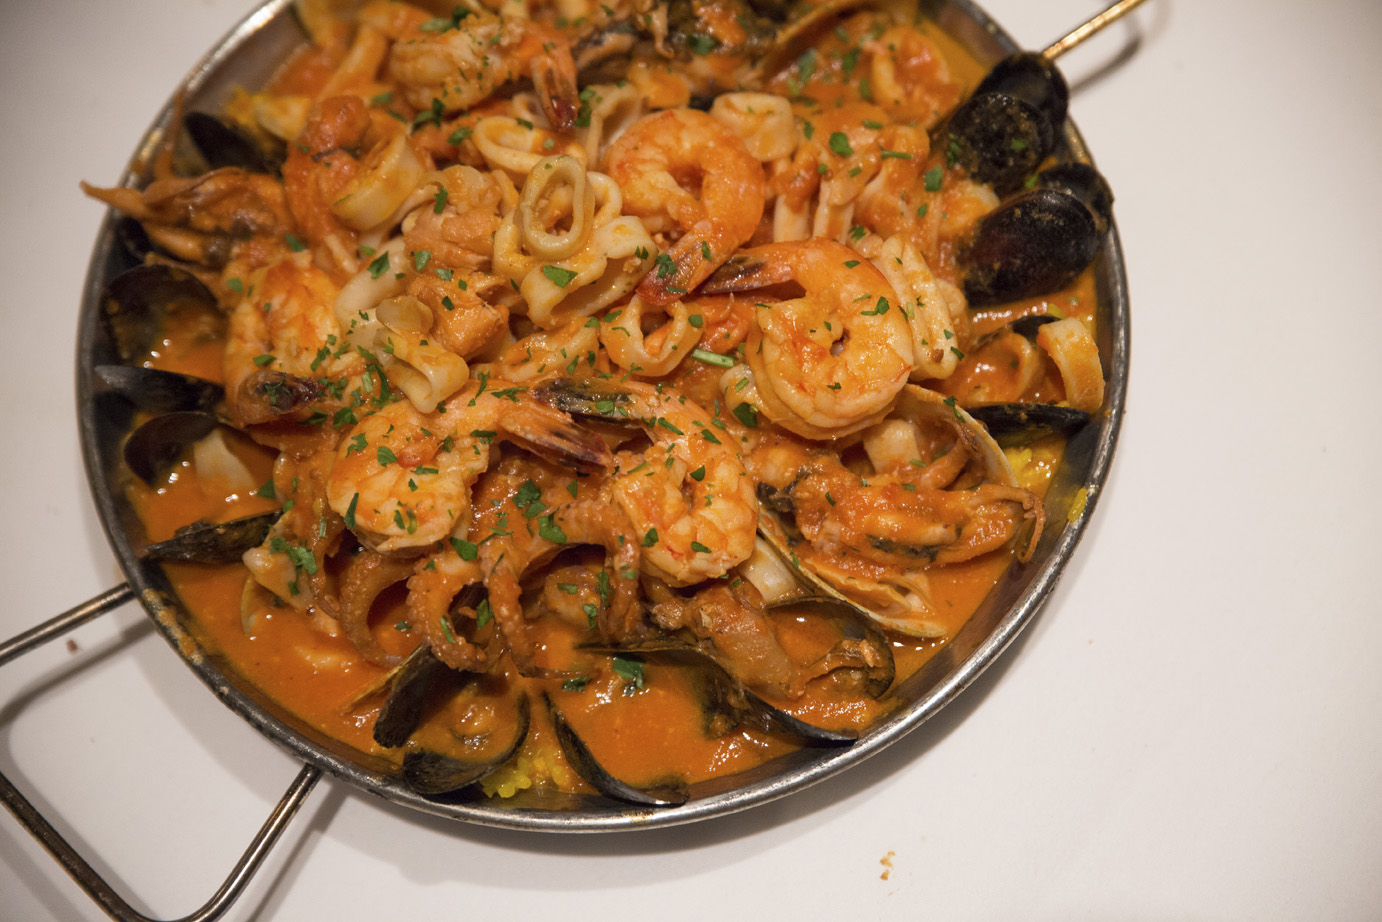   The Paella is on the menu at Cafe Buenos Aires in Huntington.   Long Islander News photos/archives  